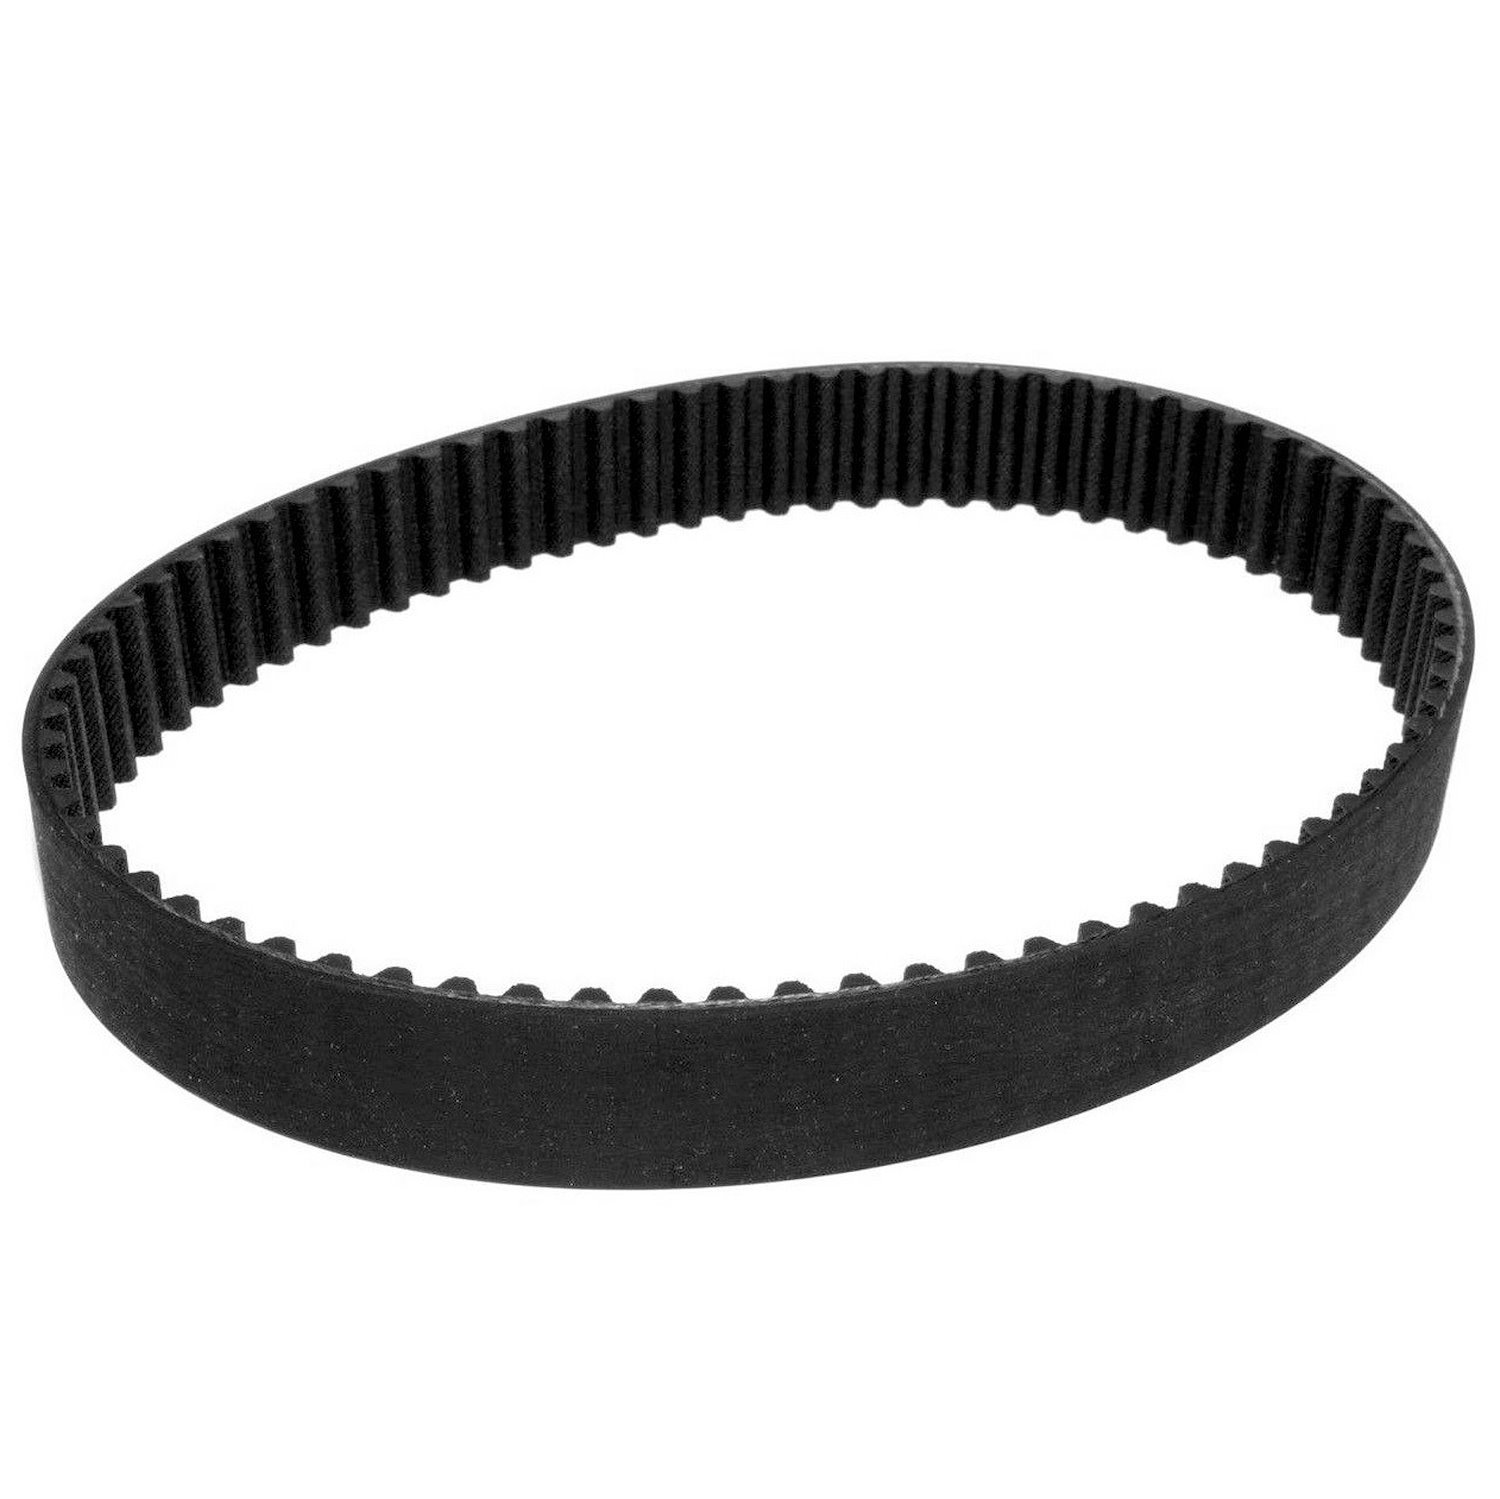 Replacement Timing Belt for Speedmaster PCE262.1001